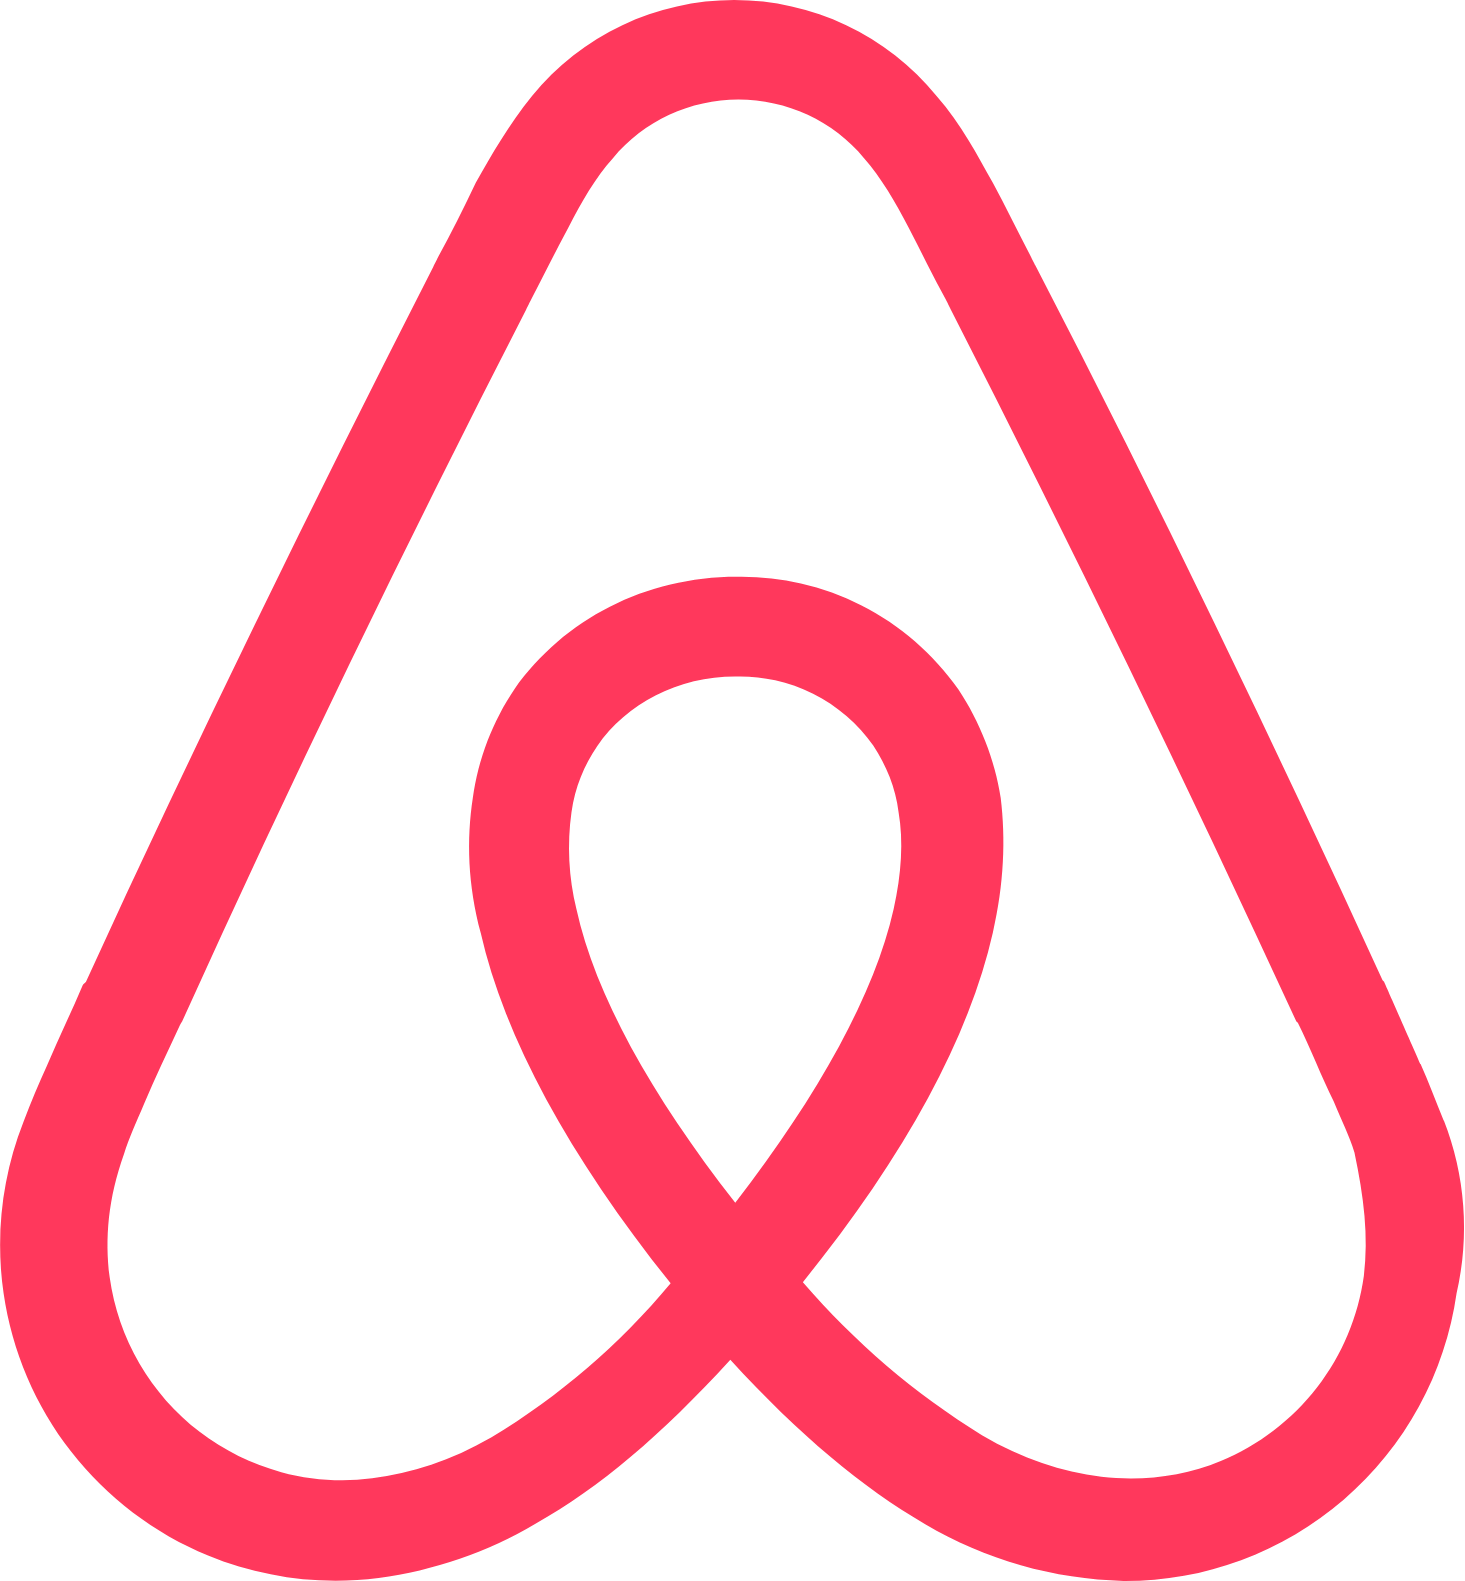 Airbnb logo in transparent PNG and vectorized SVG formats